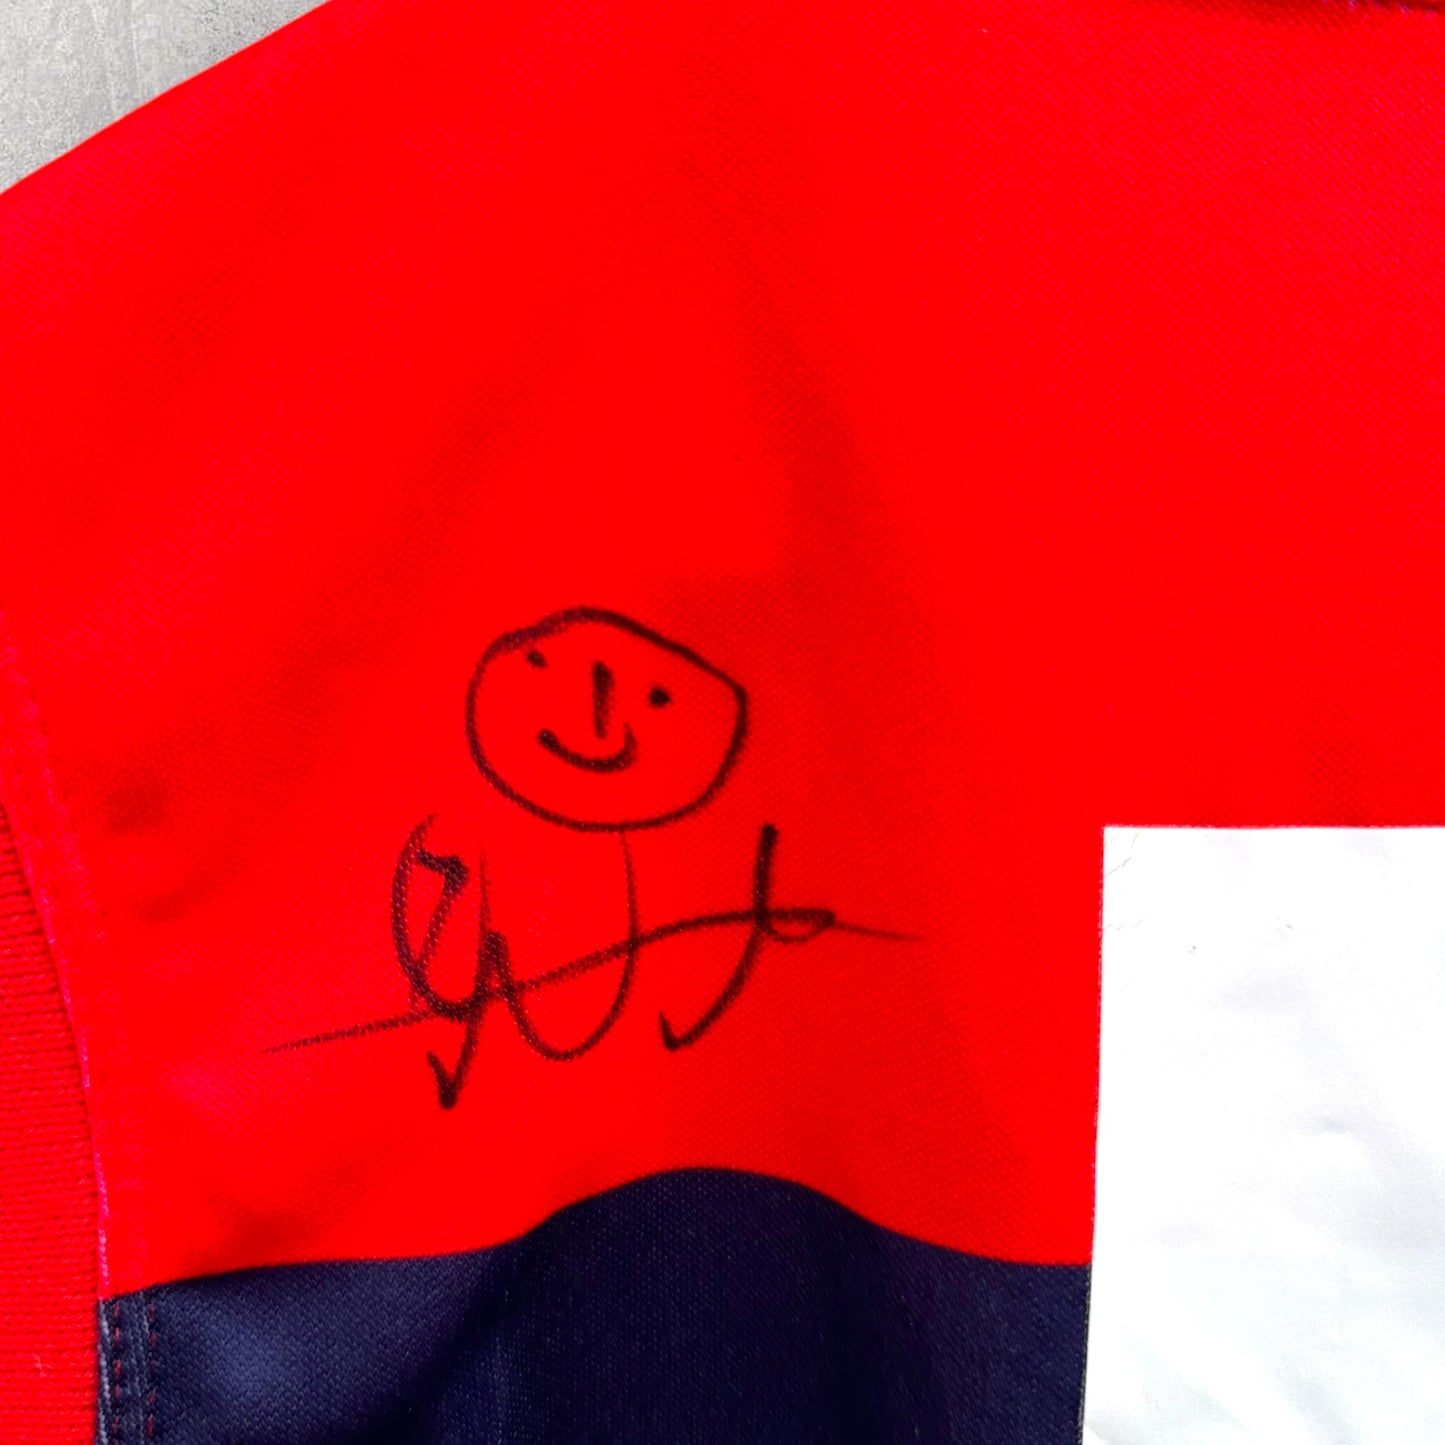 MELBOURNE DEMONS PLAYER ISSUED AND SIGNED 2008 HOME JERSEY